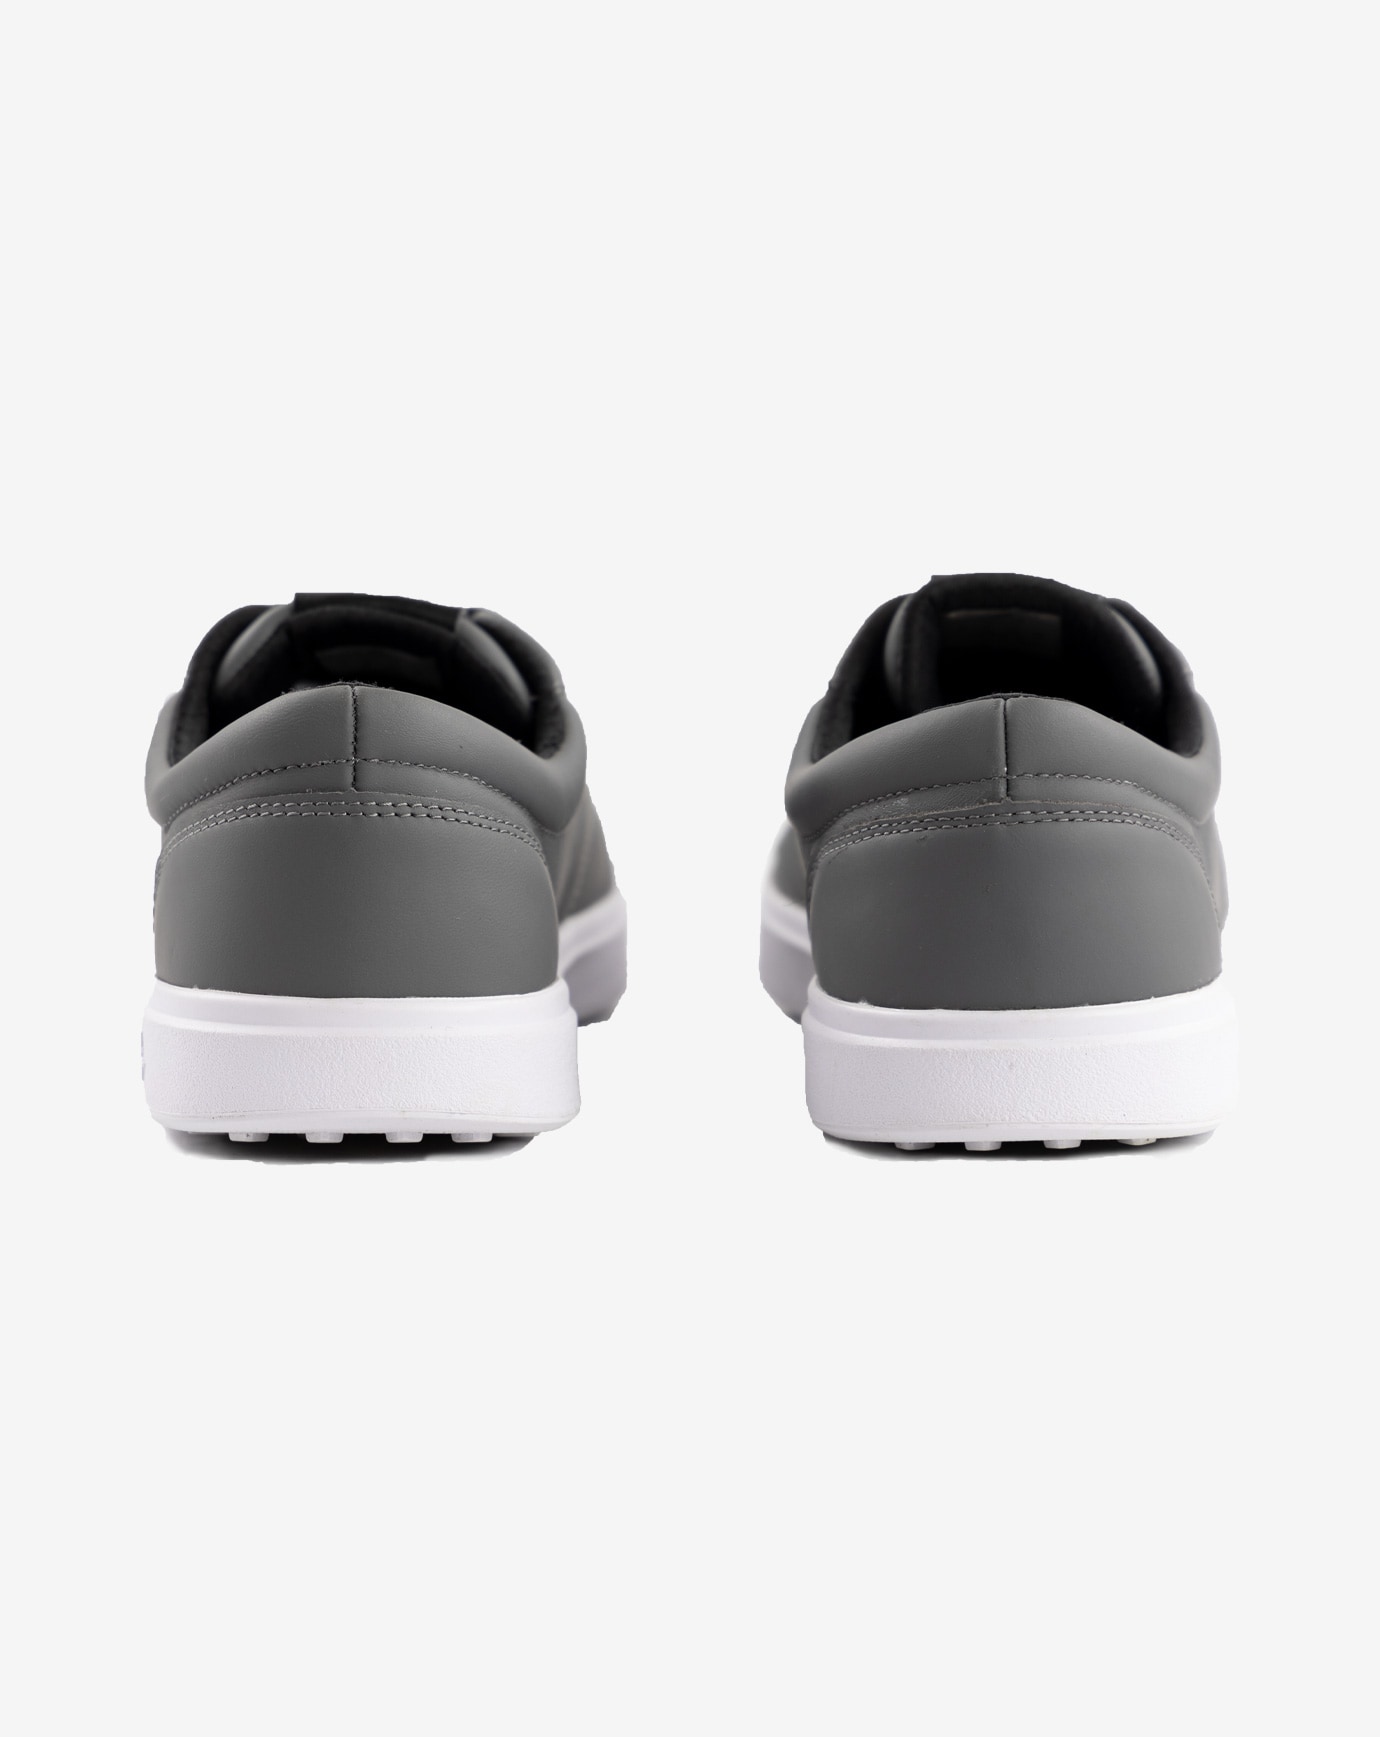 THE WILDCARD LEATHER SPIKELESS GOLF SHOE Image 6